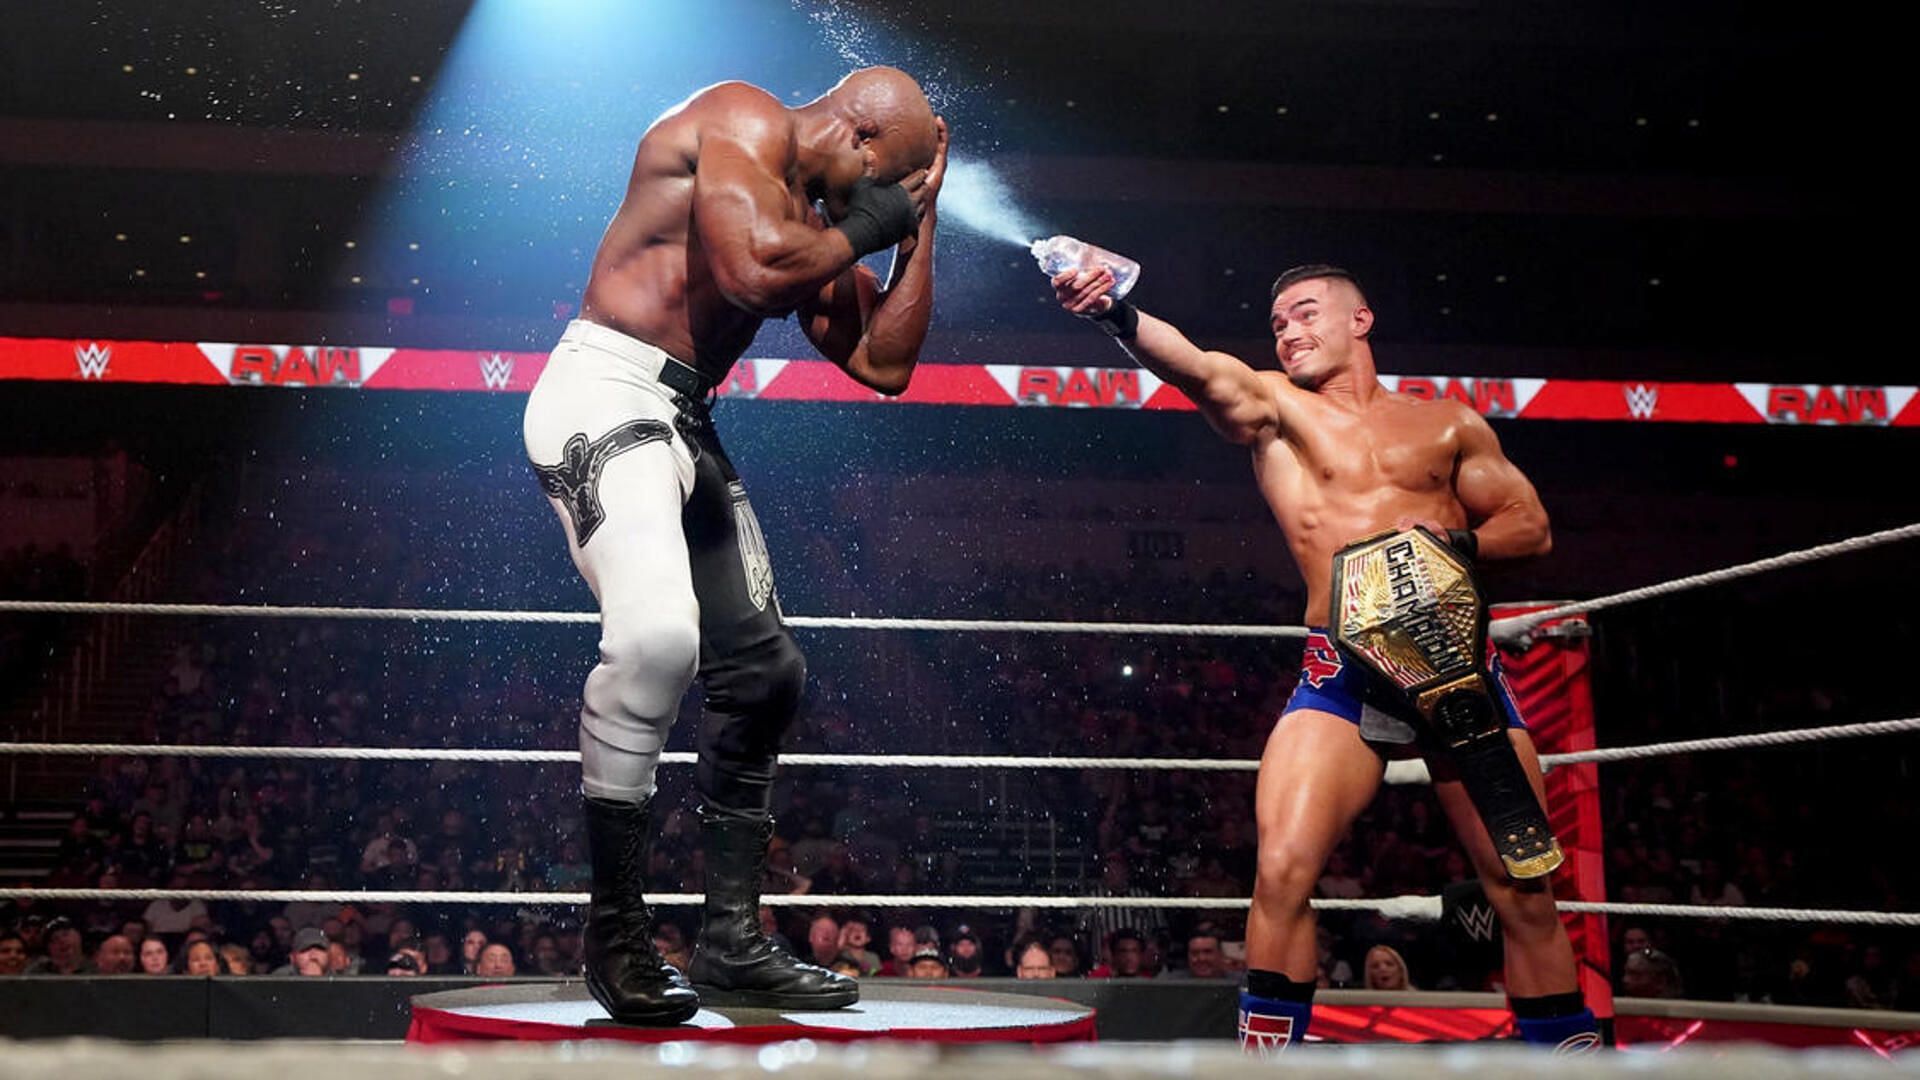 Theory spays baby oil in Lashley&#039;s face on WWE RAW (6/13)